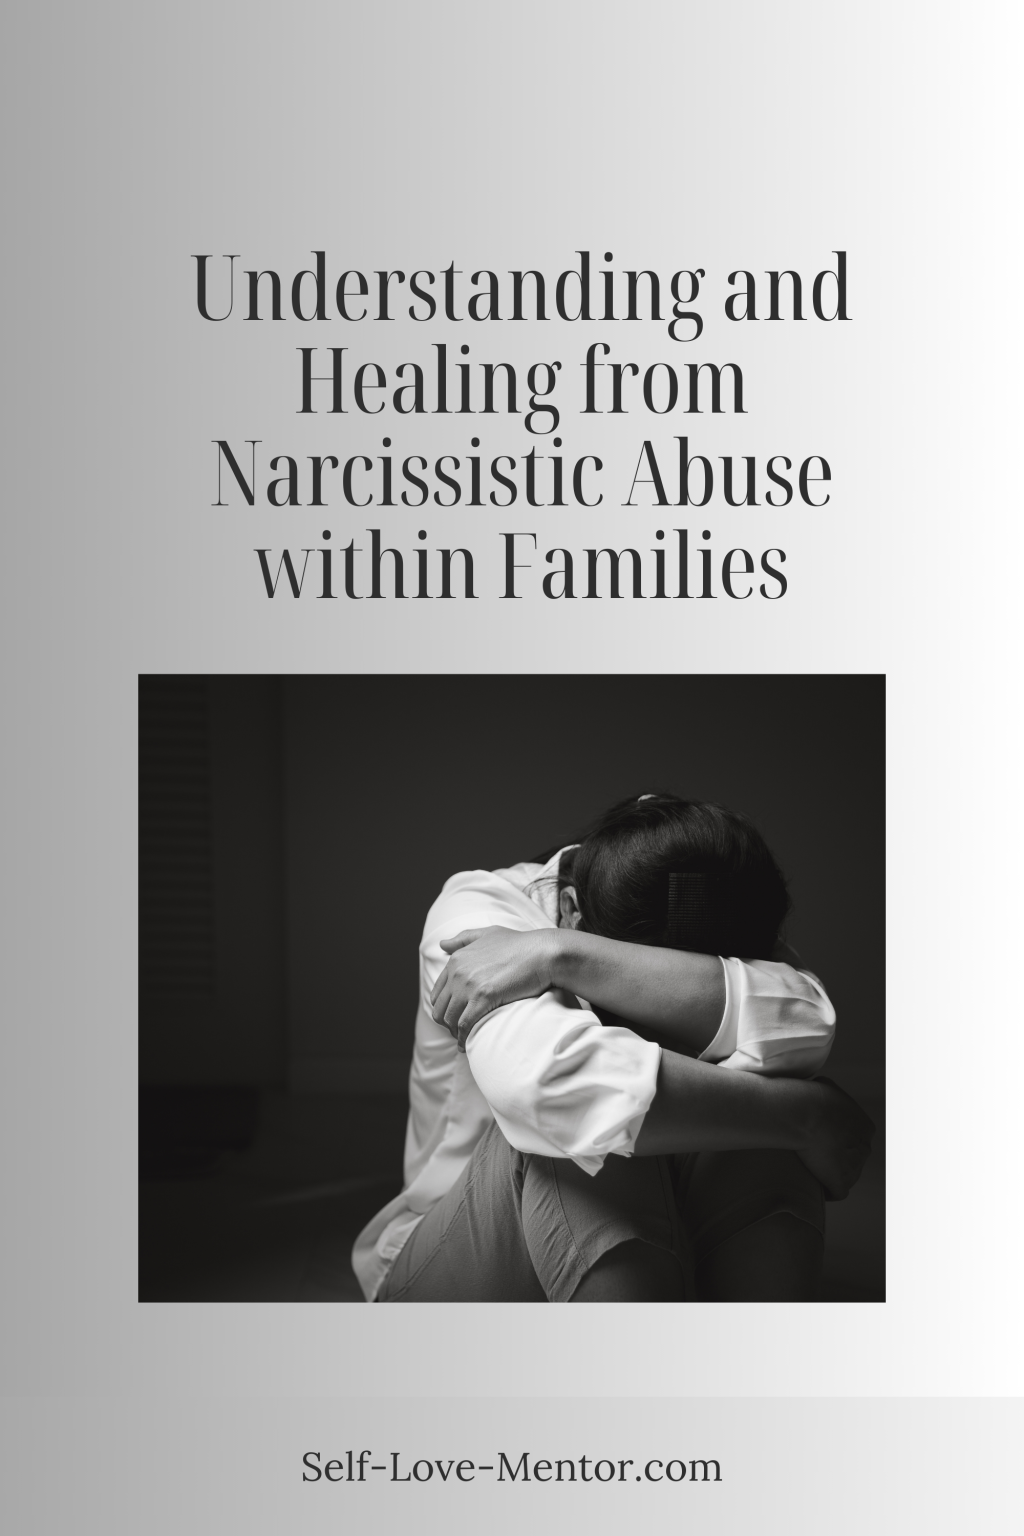 Understanding and Healing from Narcissistic Abuse within Families